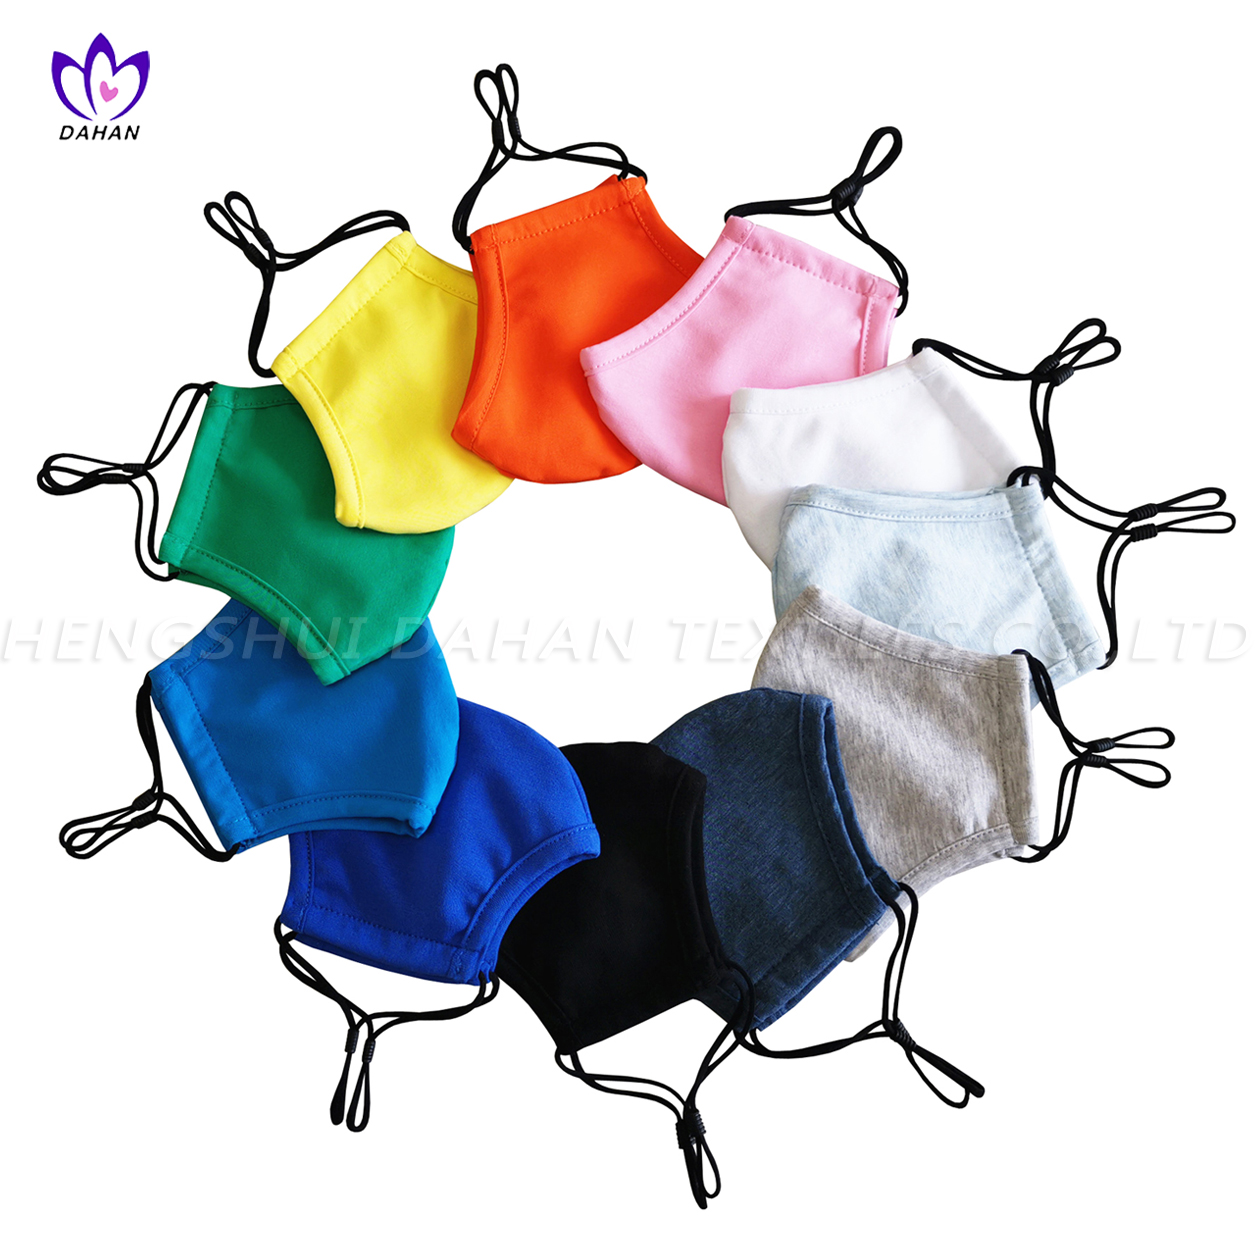 EPP05 Solid color cotton mask. 